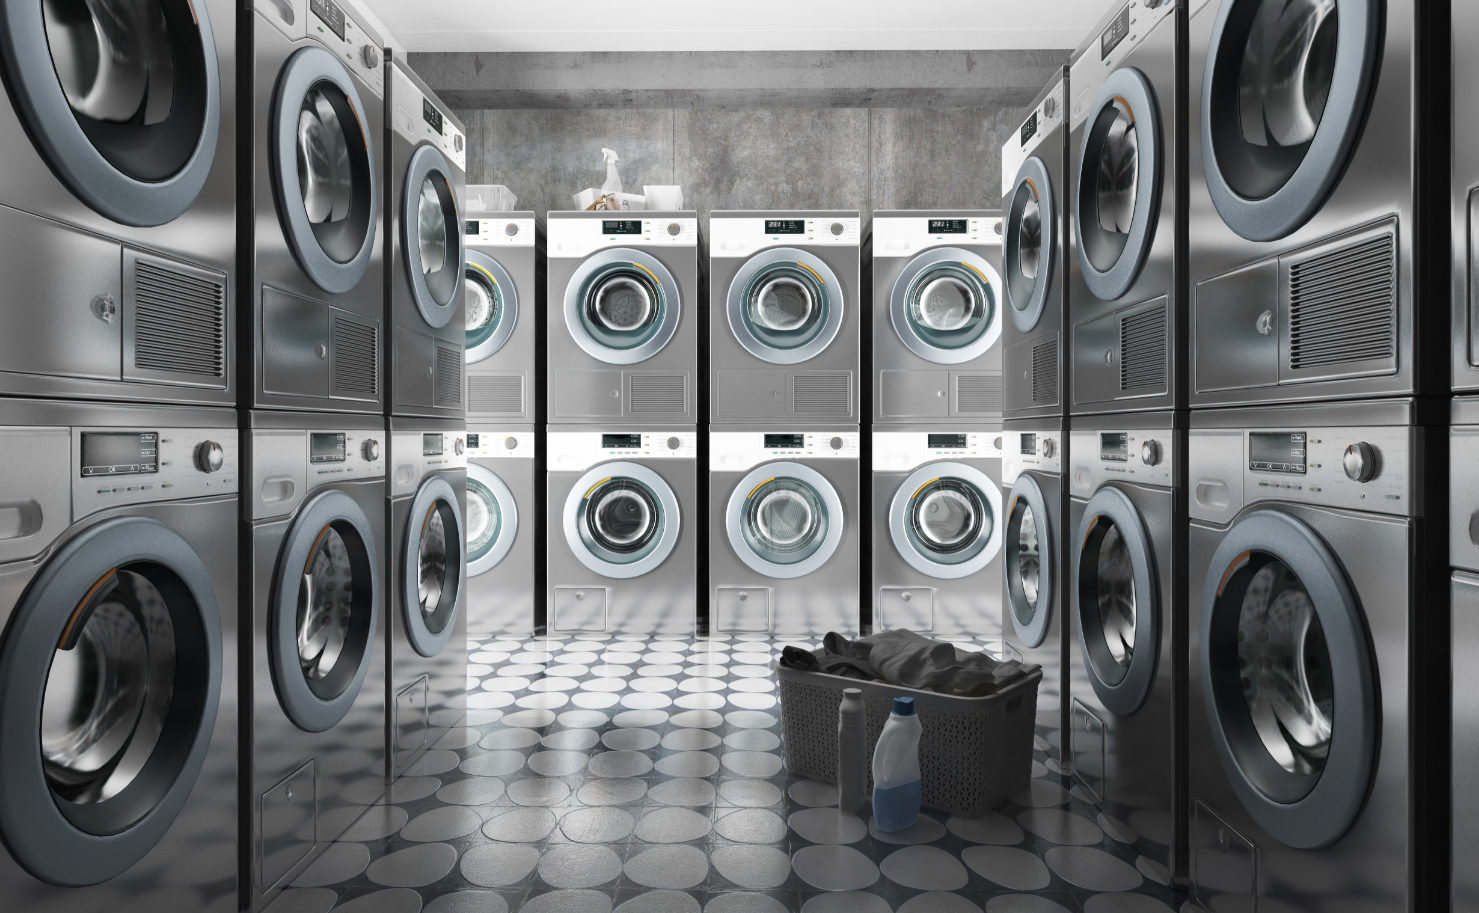 How to Start a Coin-Operated Laundry Business